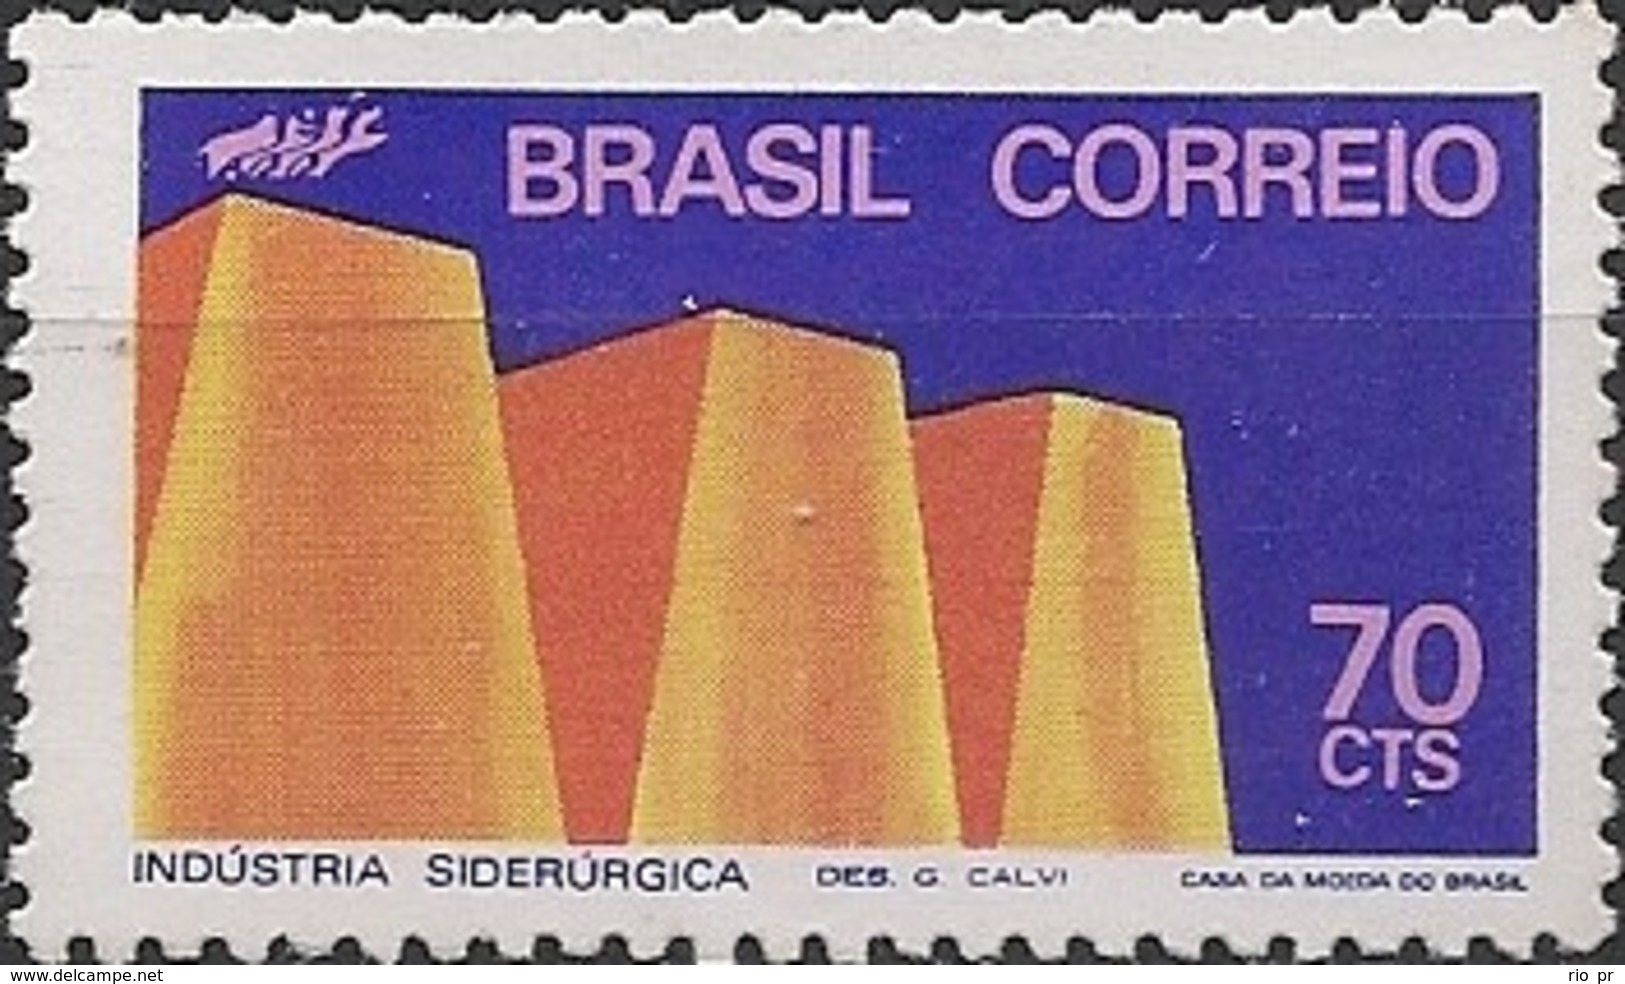 BRAZIL - INDUSTRIAL DEVELOPMENT, SIDERURGICAL INDUSTRY 1972 - MNH - Unused Stamps